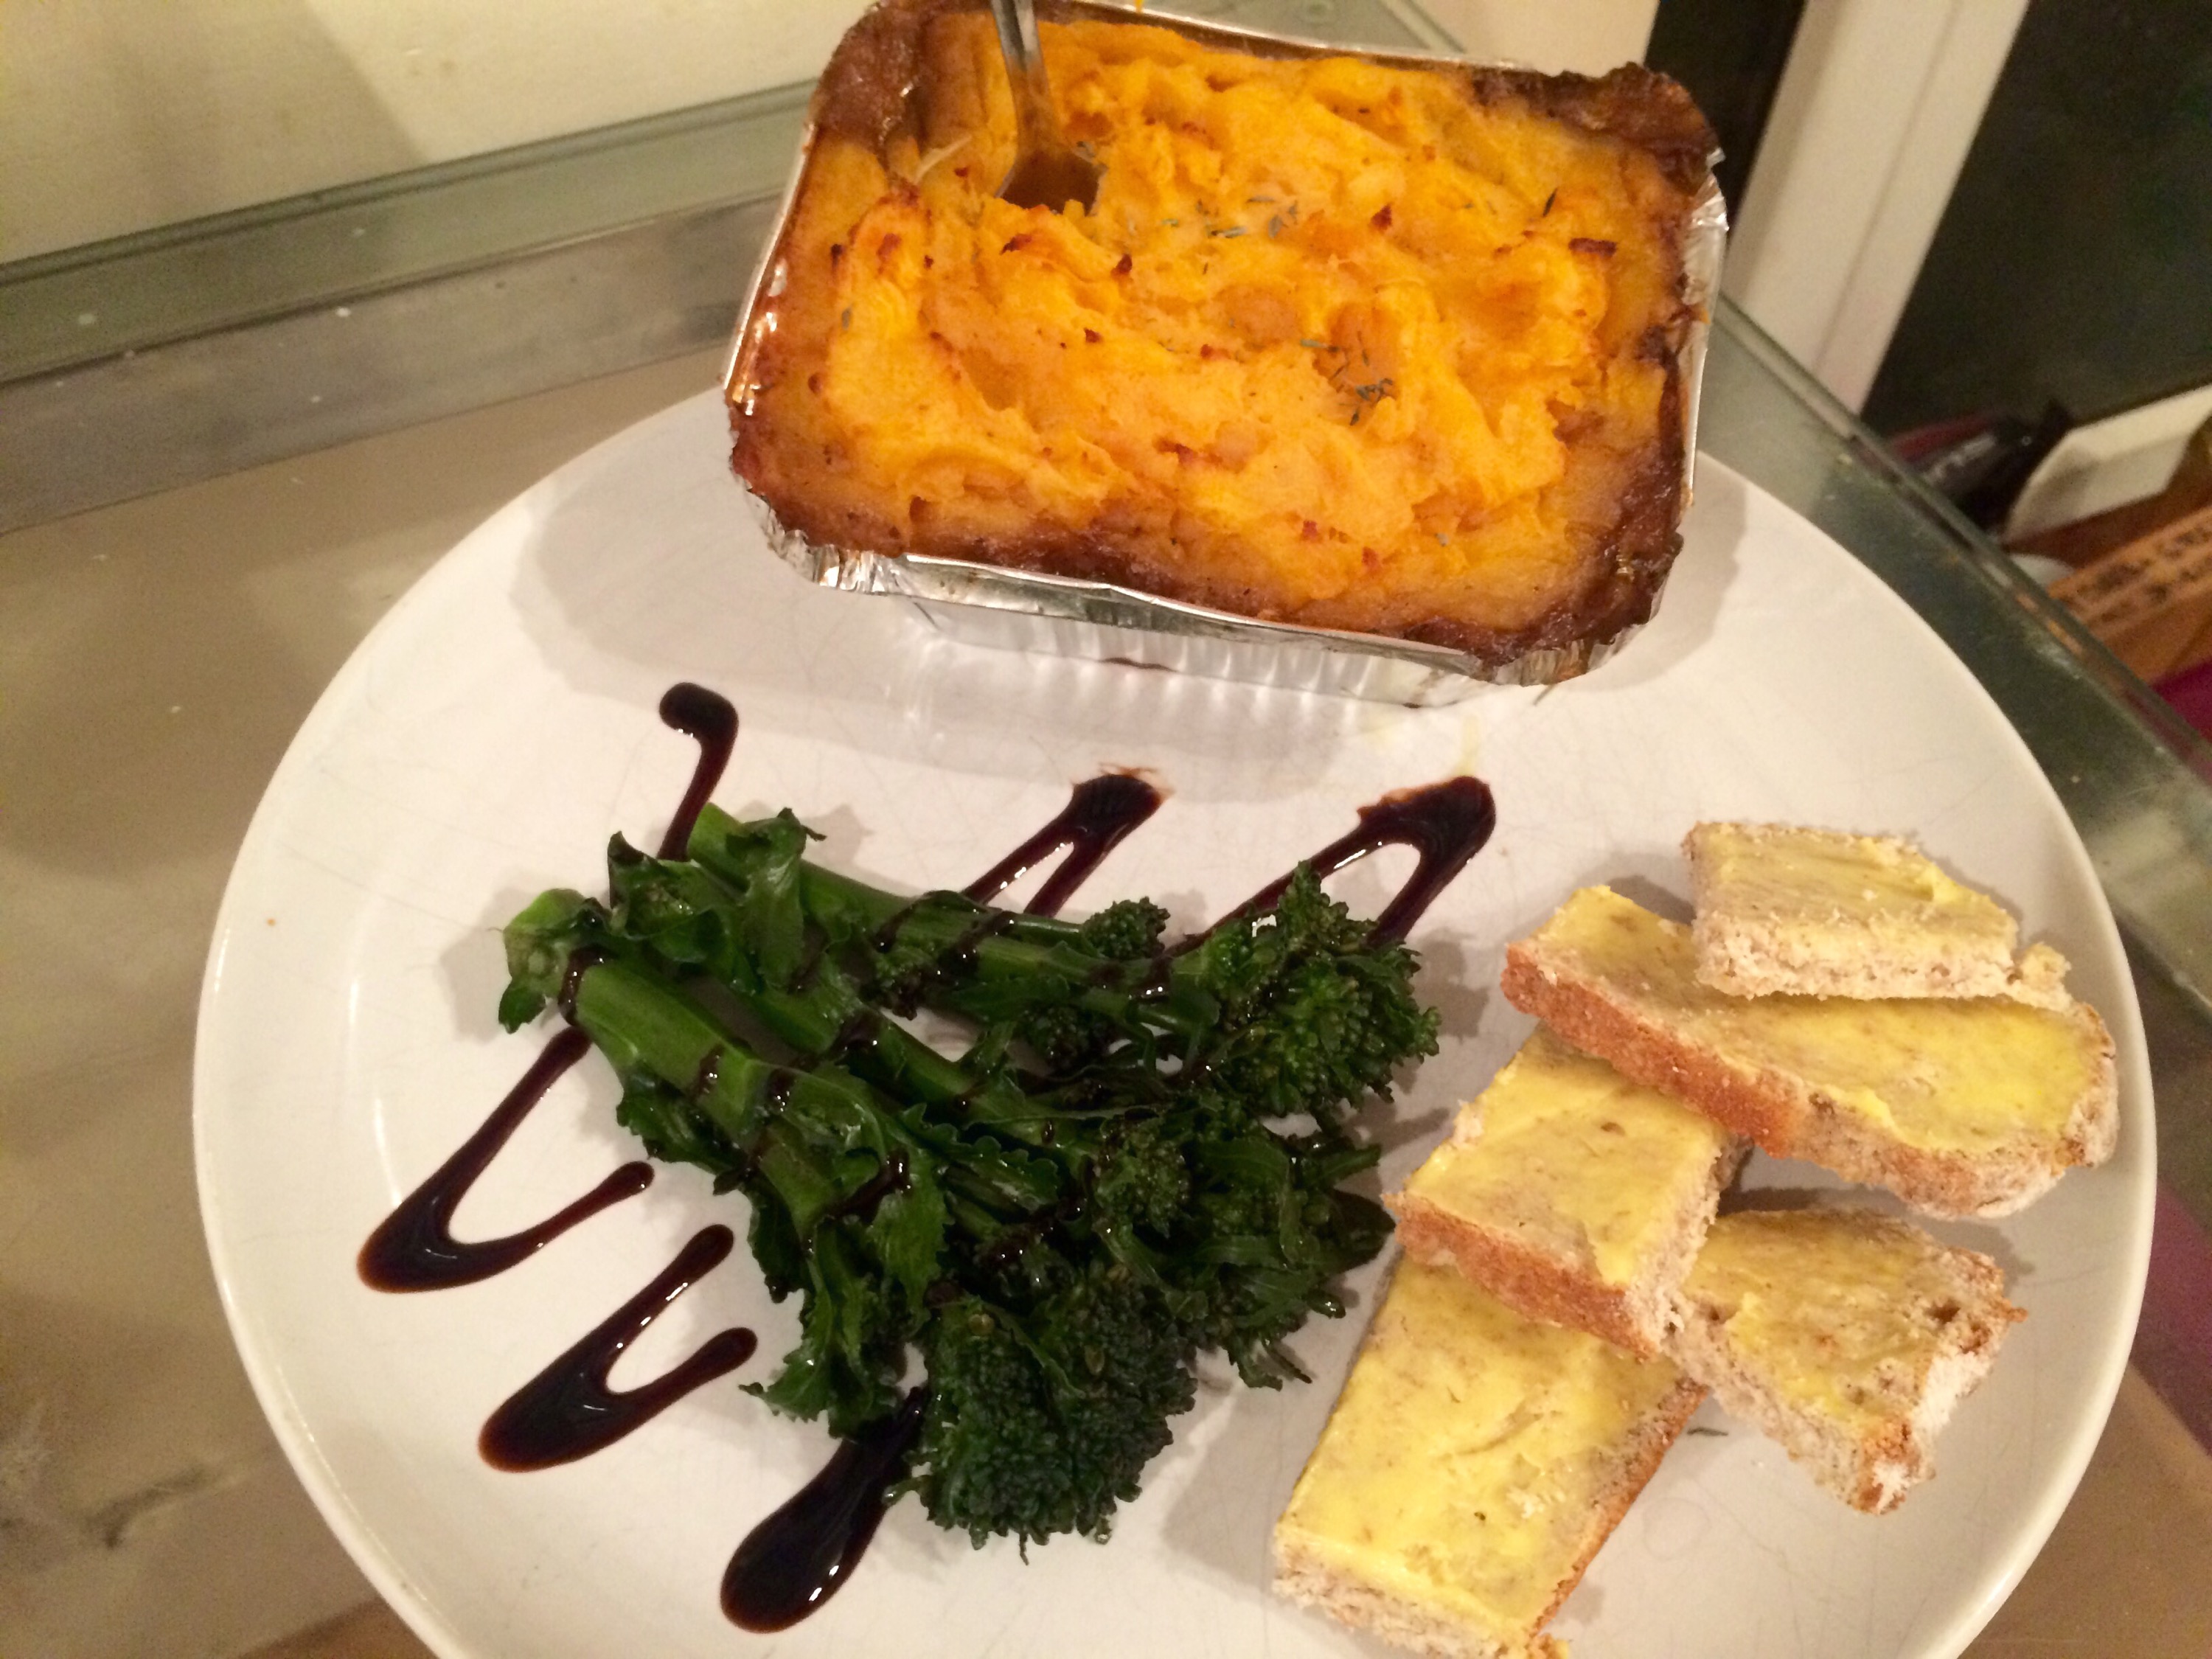 Welsh Shepherds pie with three veg mash & purple sprouting broccoli
spears -welcome to comfort food! 